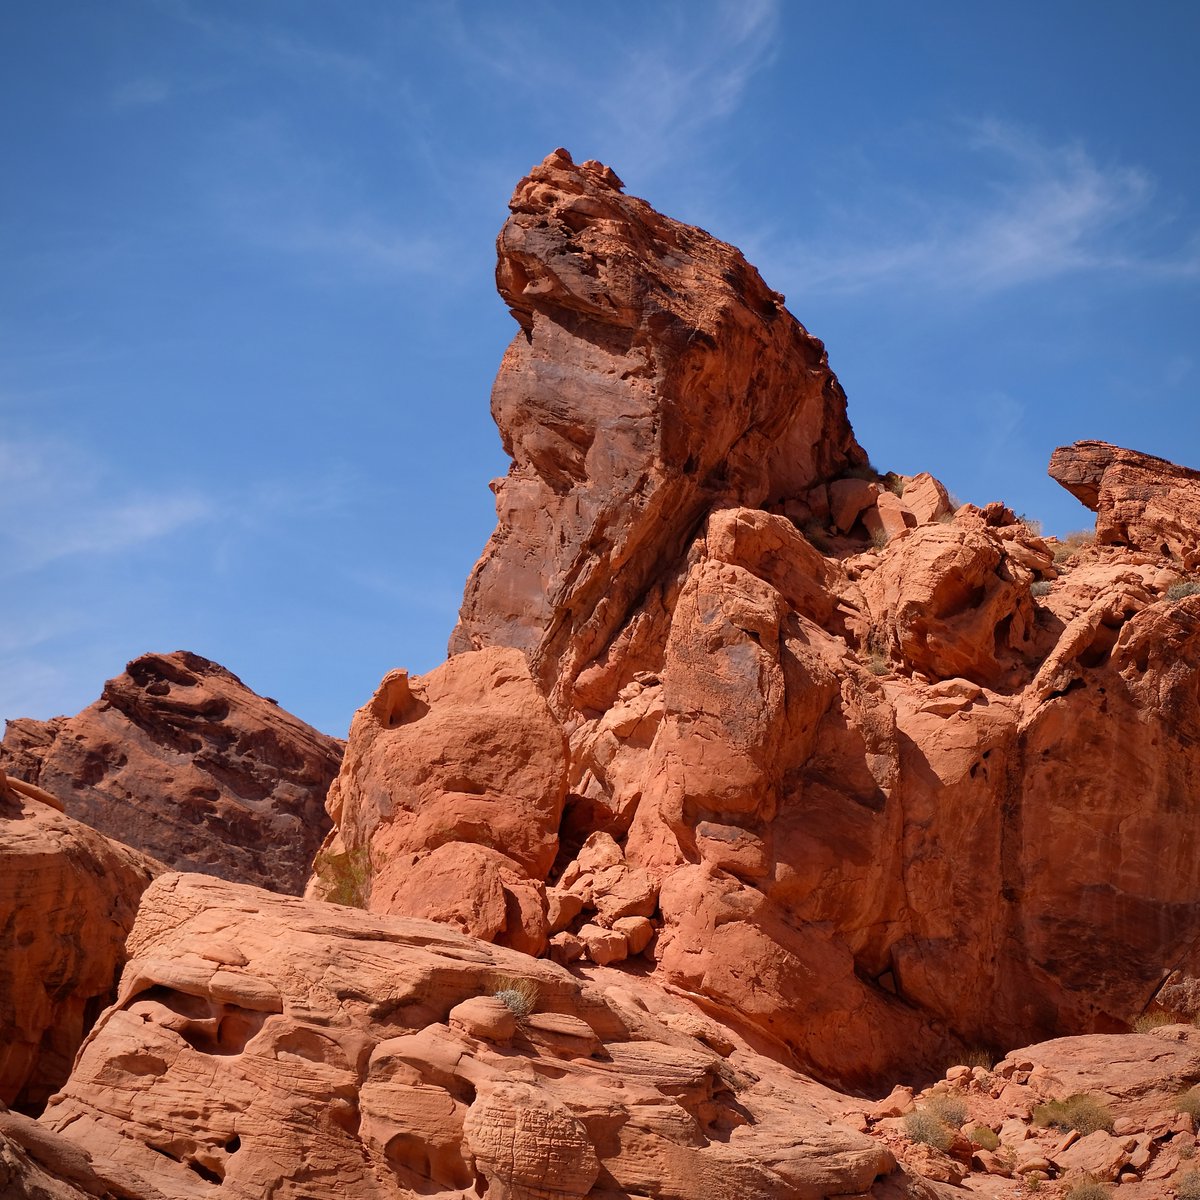 Valley of Fire State Park, Nevada

#Photography #LandscapePhotography #ValleyofFire